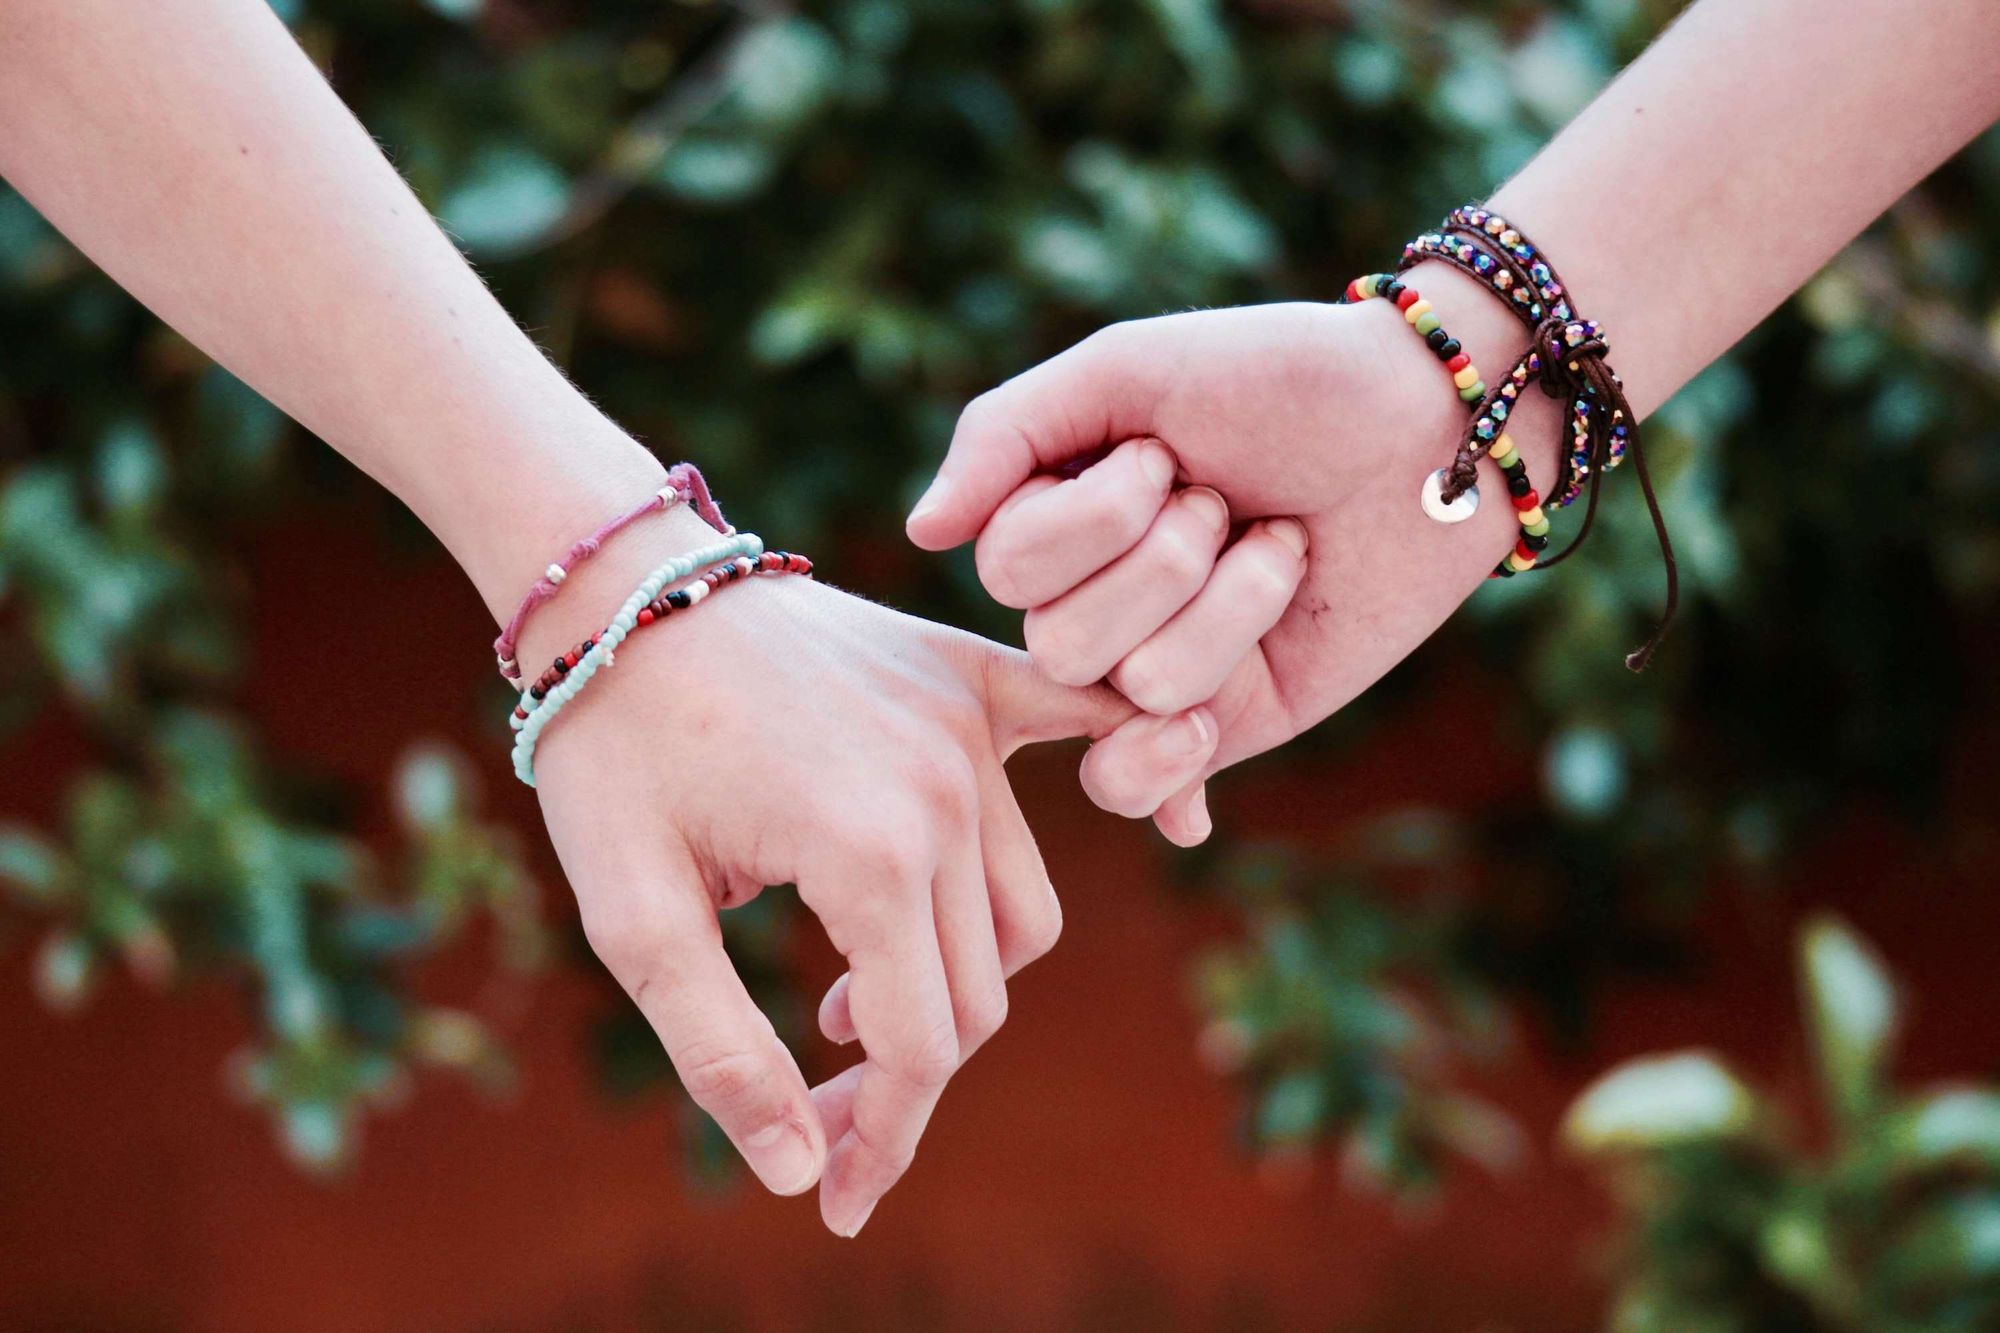 Close up of pair of interlocked hands against background foliage 